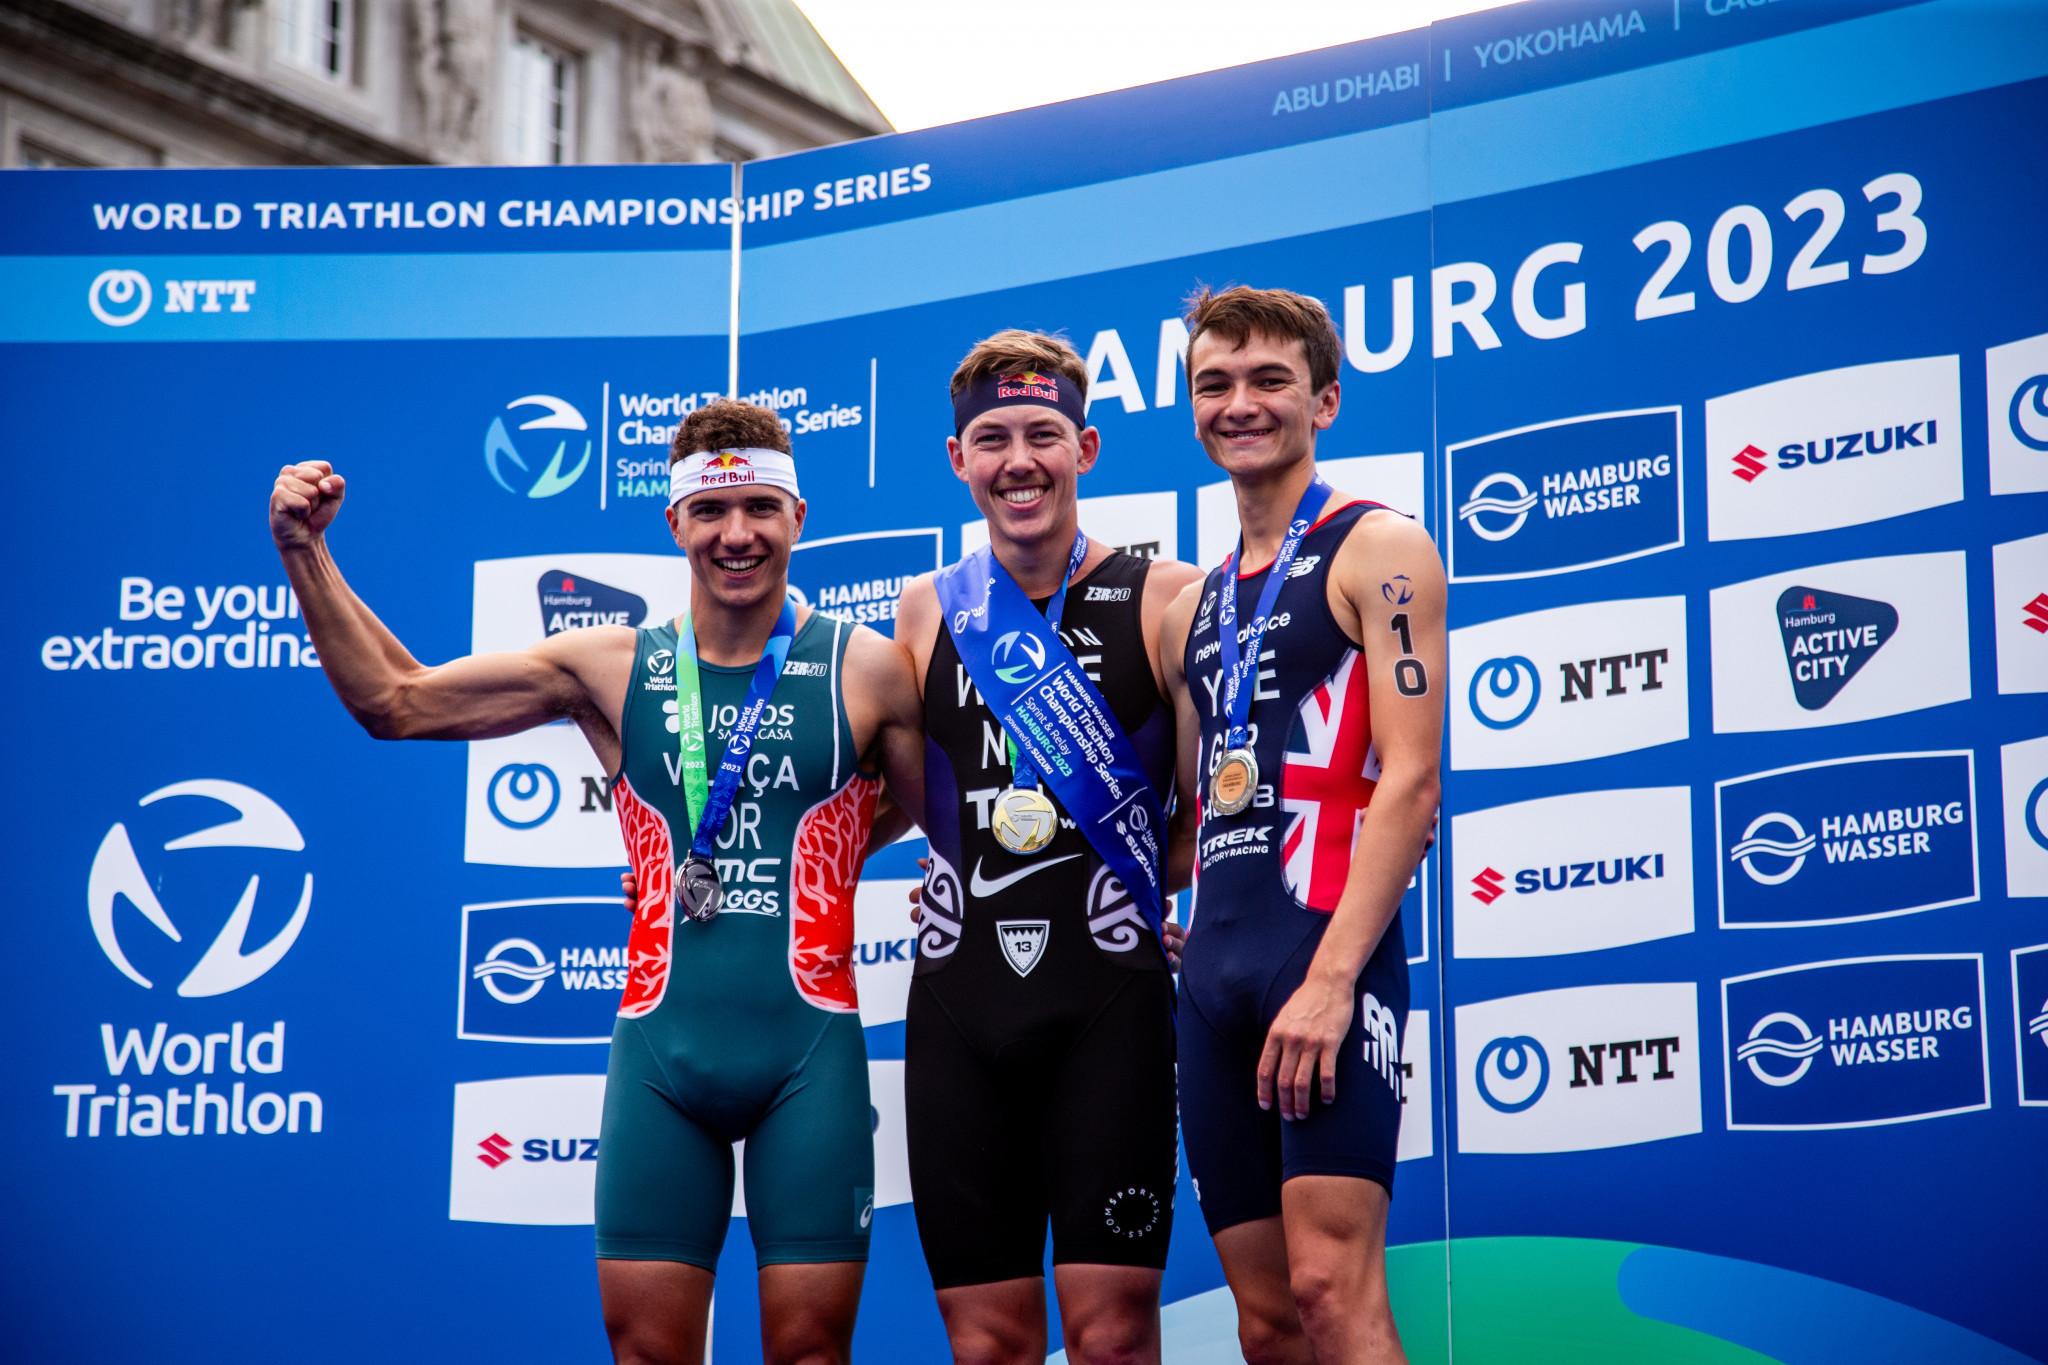 Tokyo 2020 bronze medallist Yee finished third against as Portugal's Vasco Vilaca pipped him to the silver medal ©World Triathlon